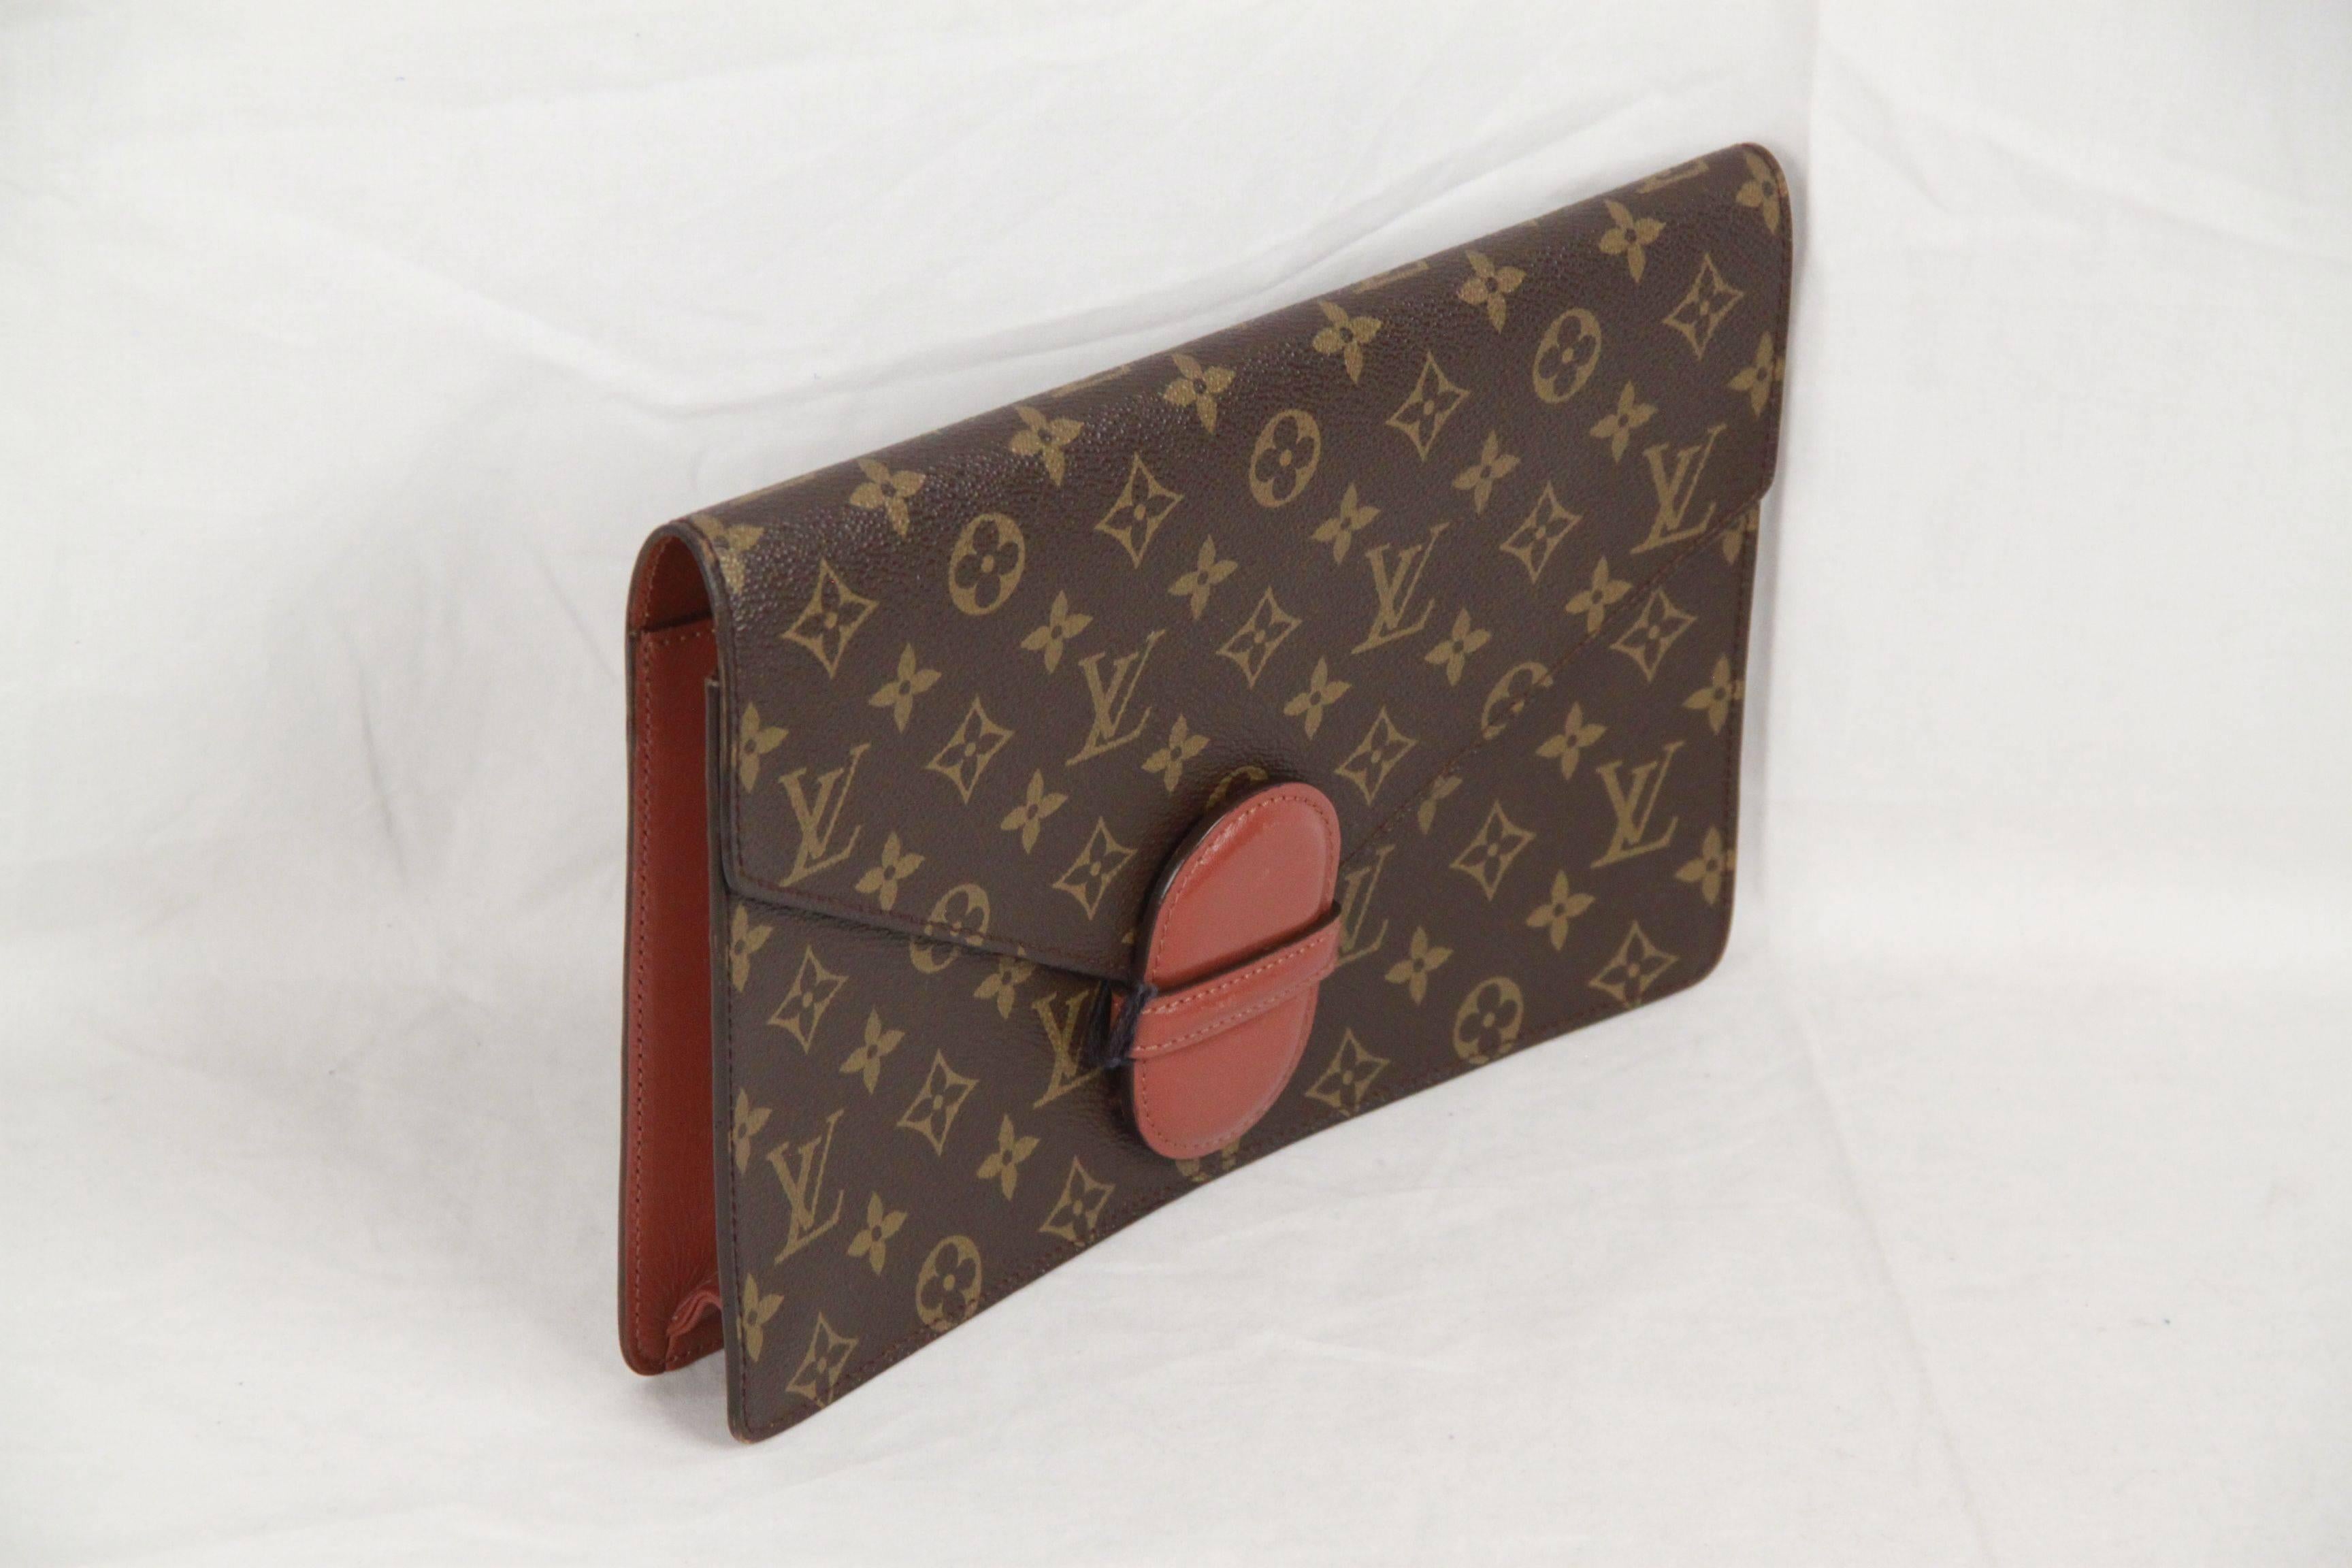 - Louis Vuitton vintage clutch in Monogram canvas
- Flap and thick leather closure
- crossgrain brown leather lining
- Inside has 1 zipper pocket
- Measurements (HxLxD): 7.5 x 11 x 1.5 inches - 19 x 28 x 3,8 cm

Logos & Tags:
'LOUIS VUITTON